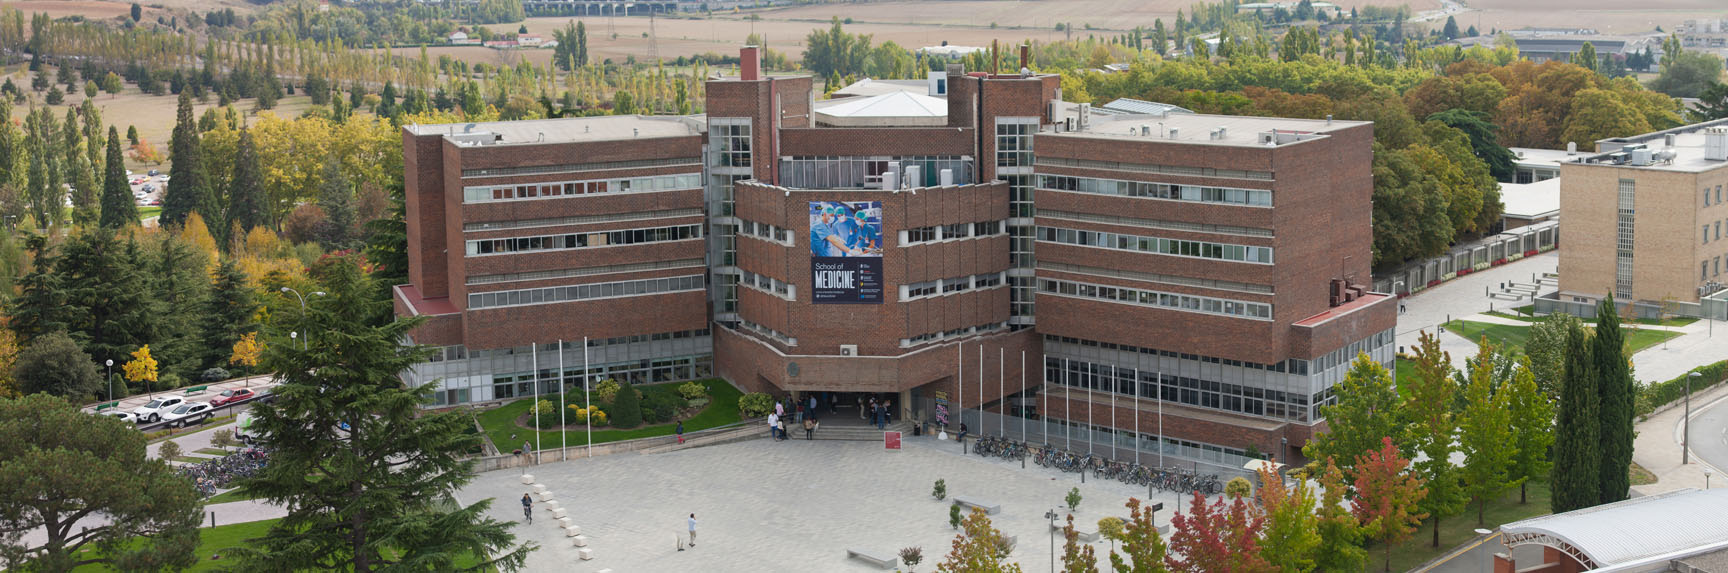 Sciences Building of campus of Pamplona